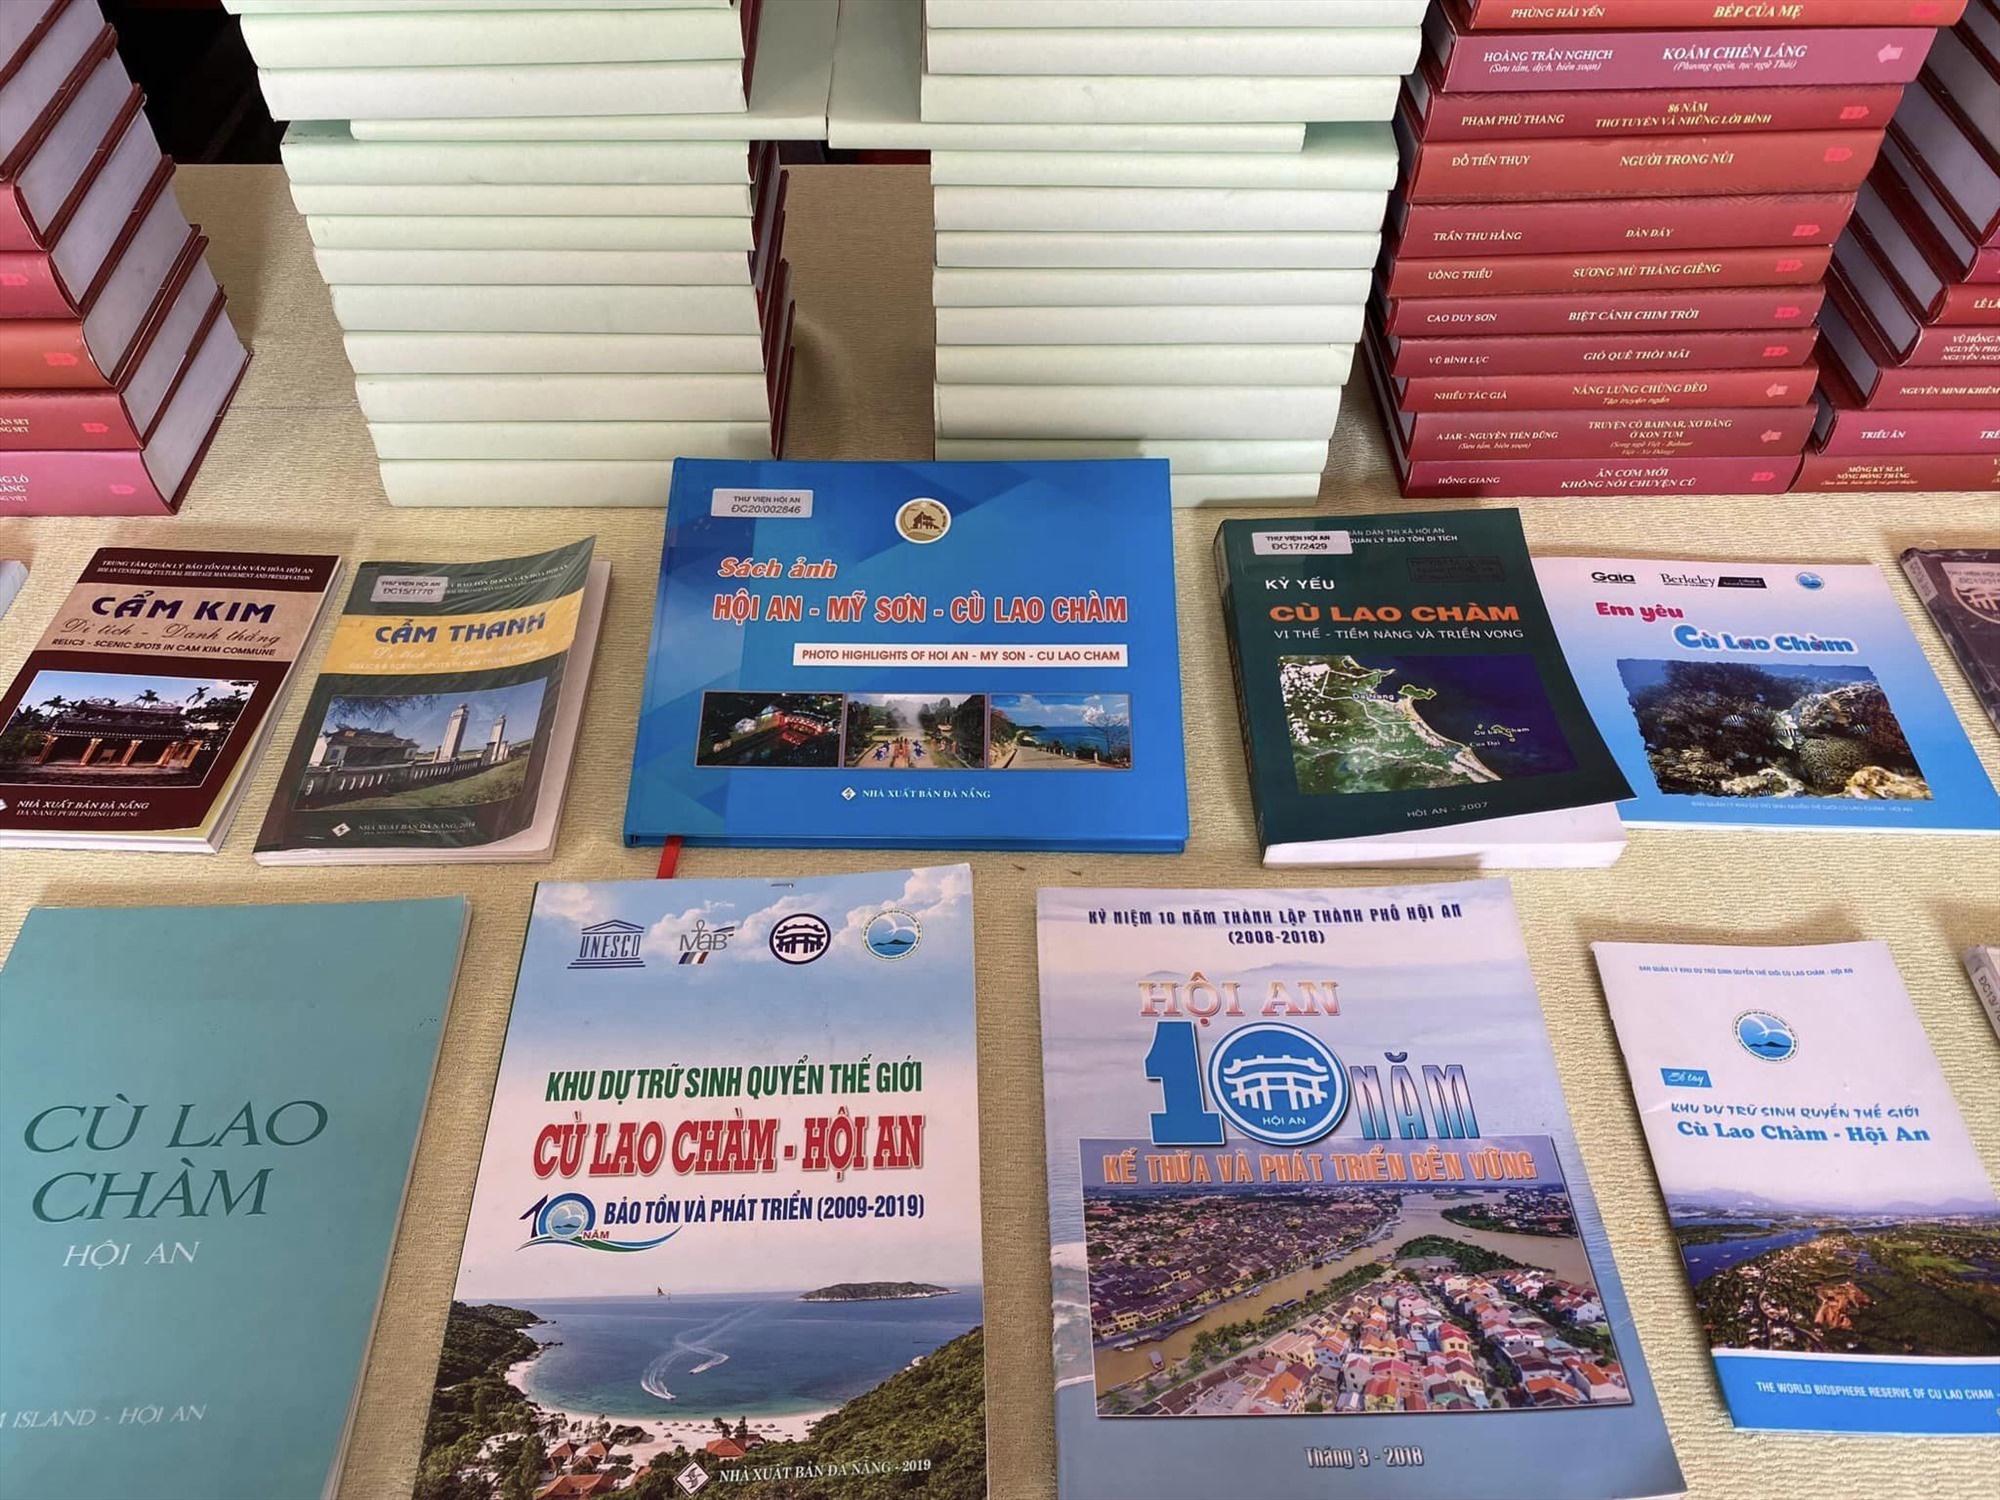 Display of publications and books on Hoi An - Quang Nam cultural heritages